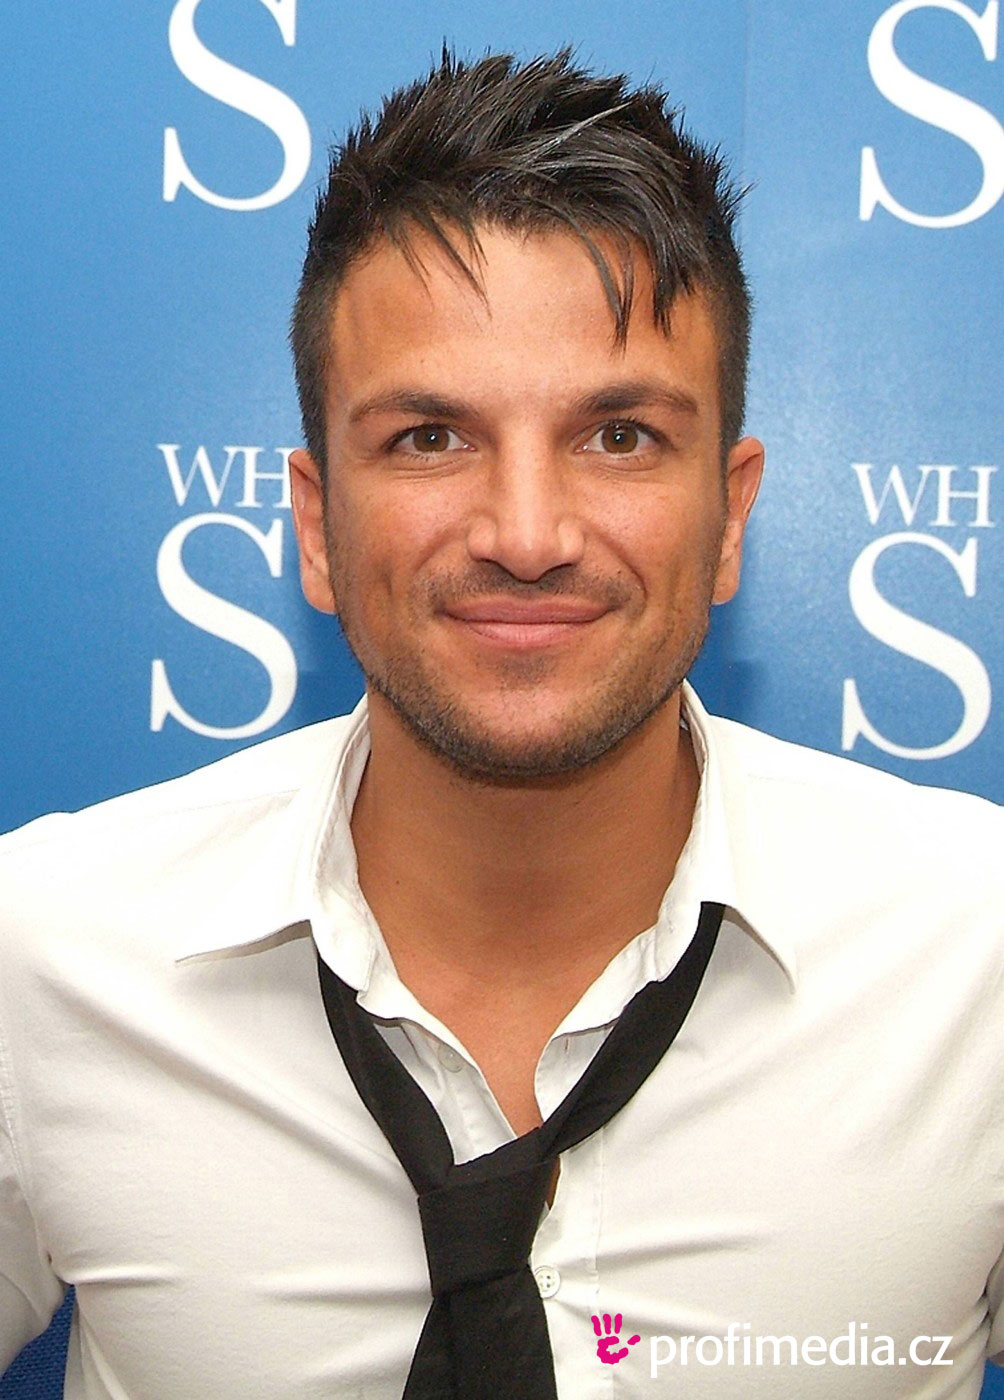 Peter Andre Cool Hairstyle  Men Hairstyles , Short, Long 